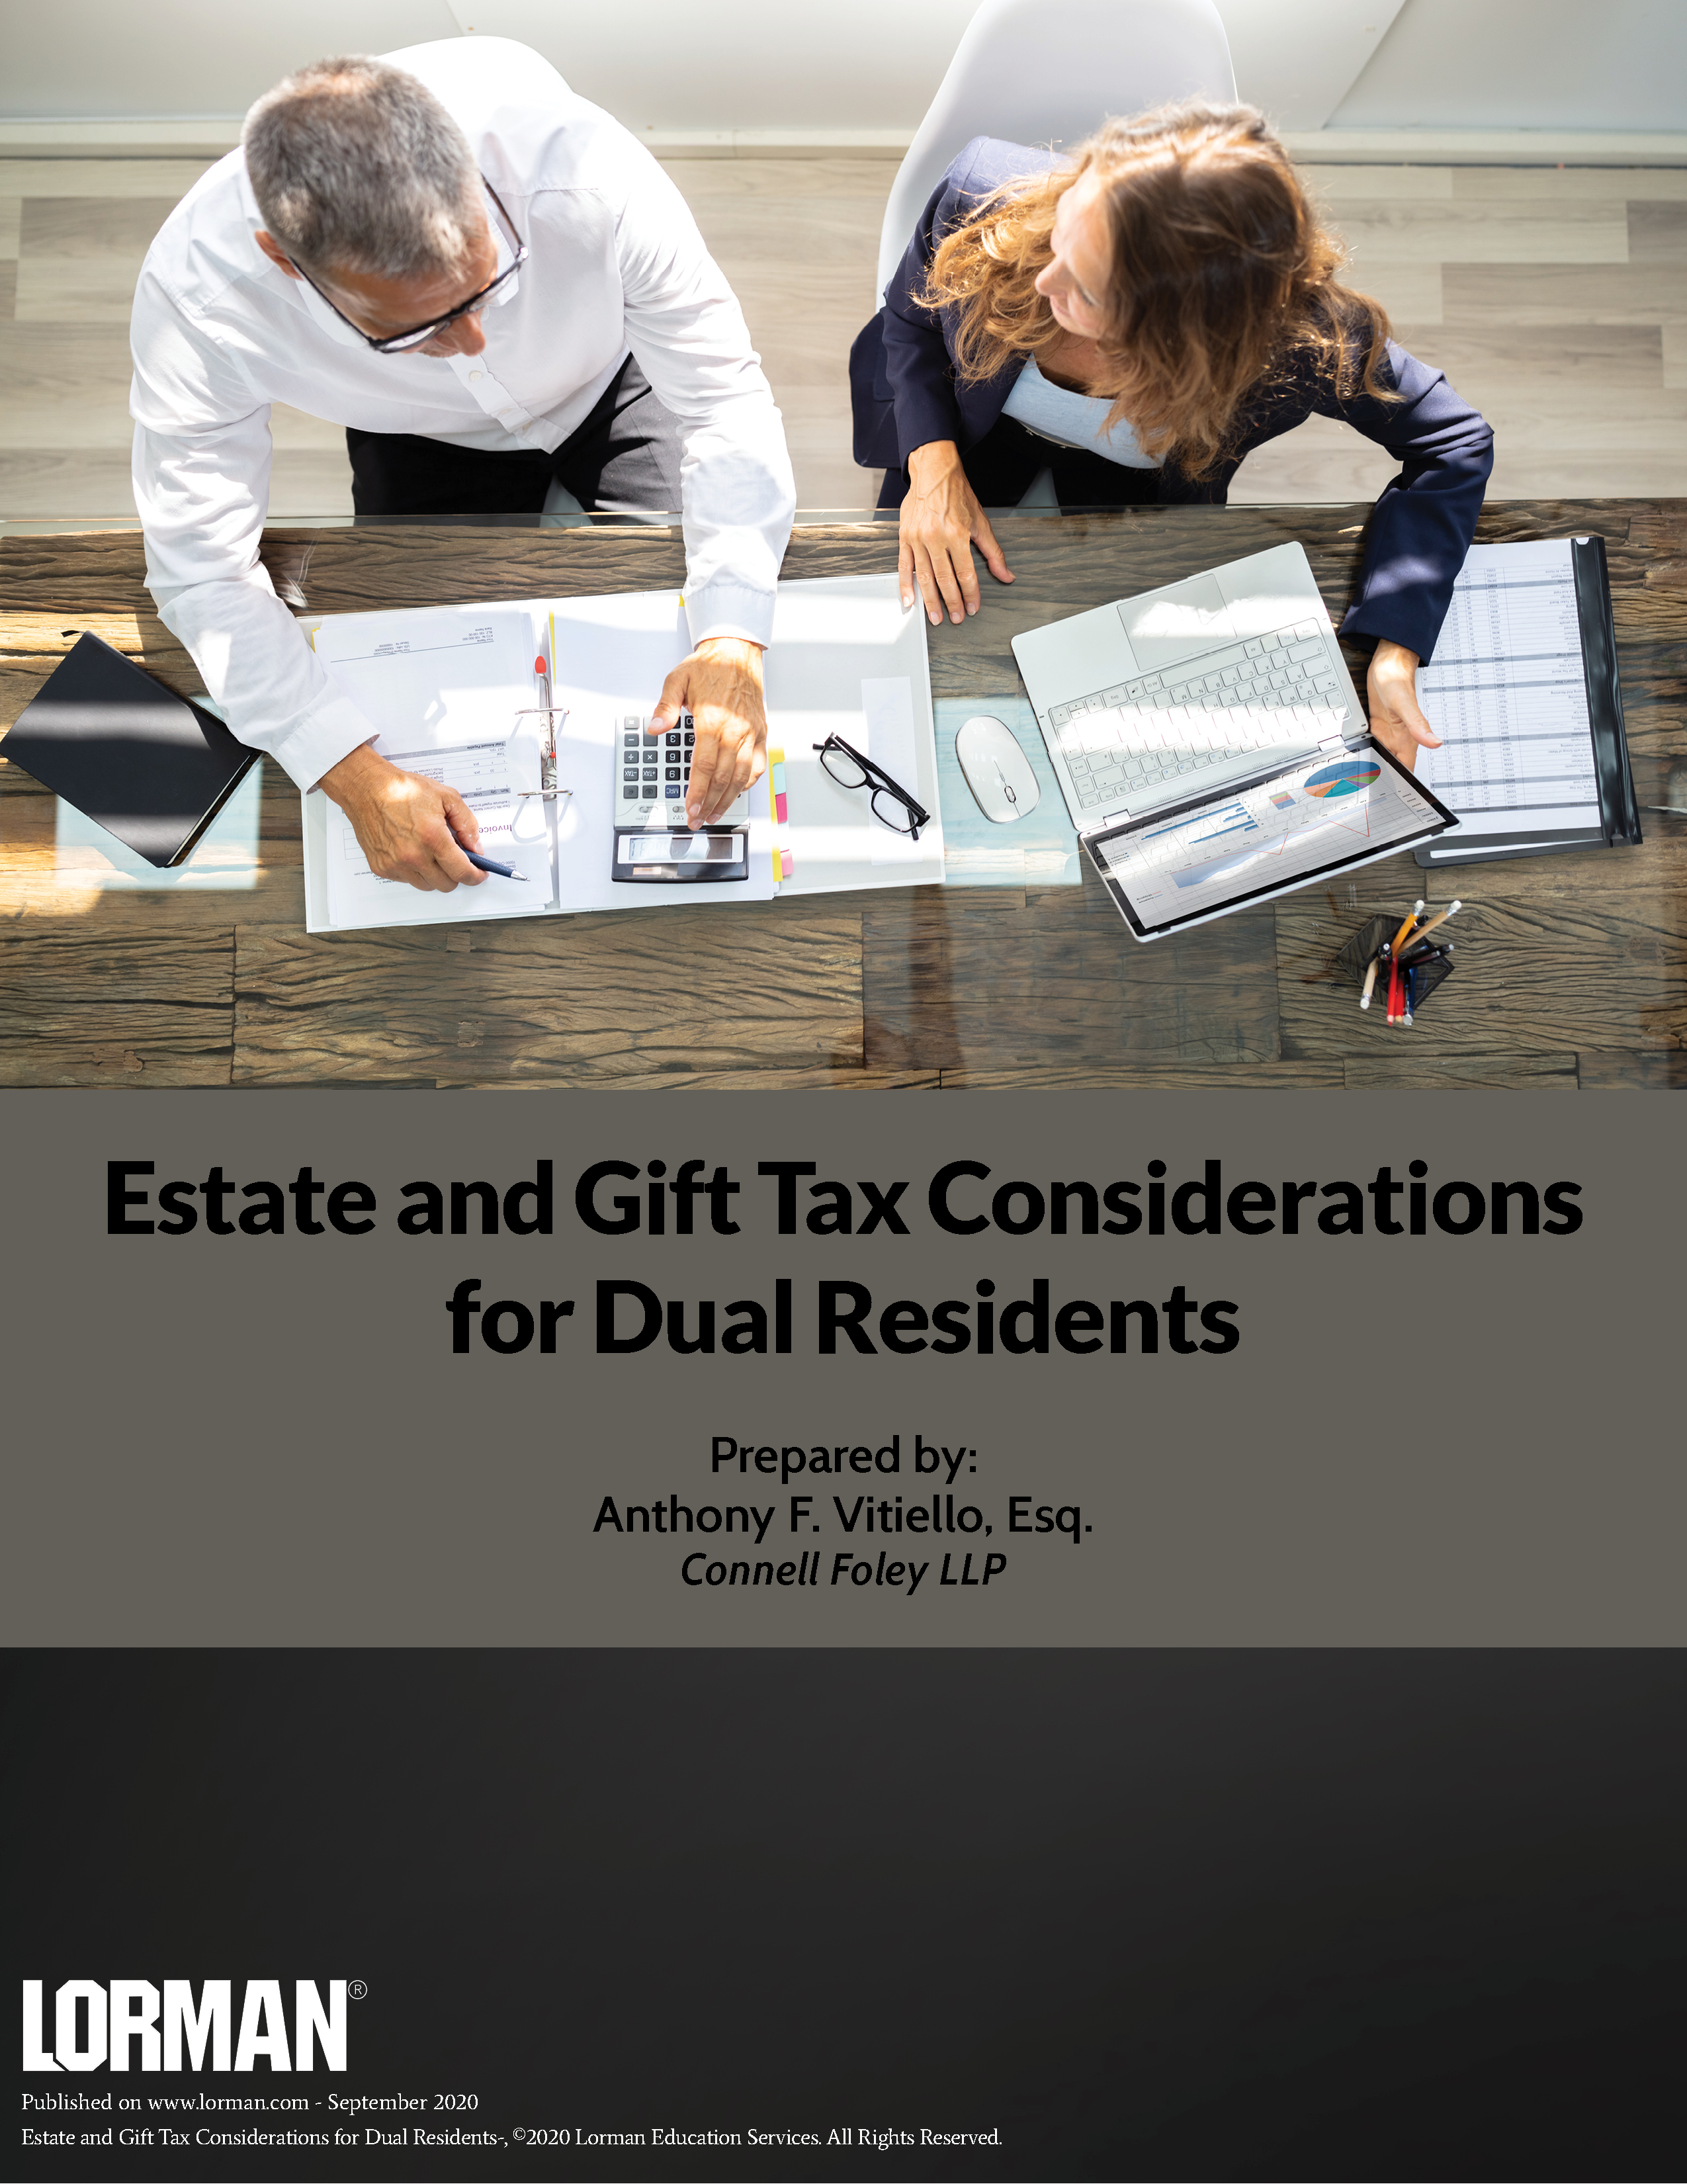 Estate and Gift Tax Considerations for Dual Residents